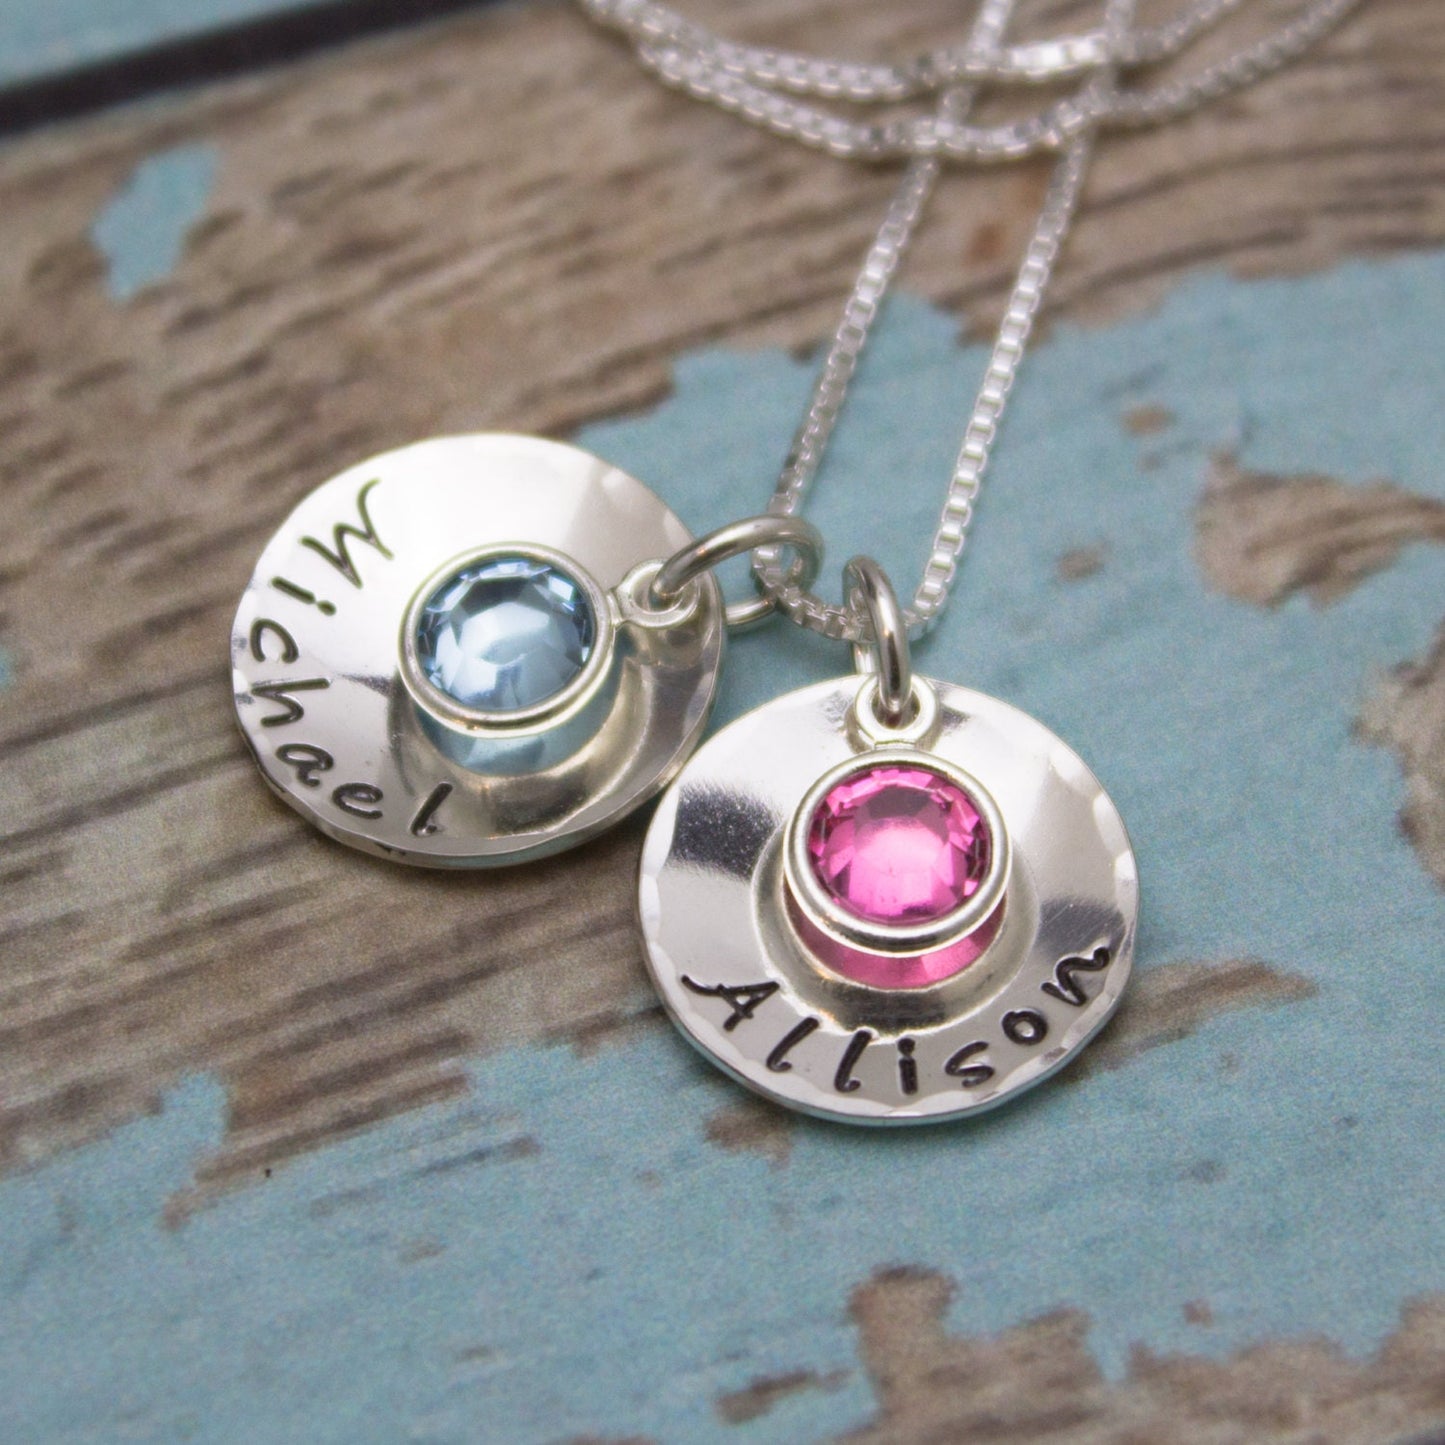 Mother's Day Gift, Sterling Silver Personalized (2) Two Discs Mother Necklace with Crystal Birthstone, Mommy Necklace